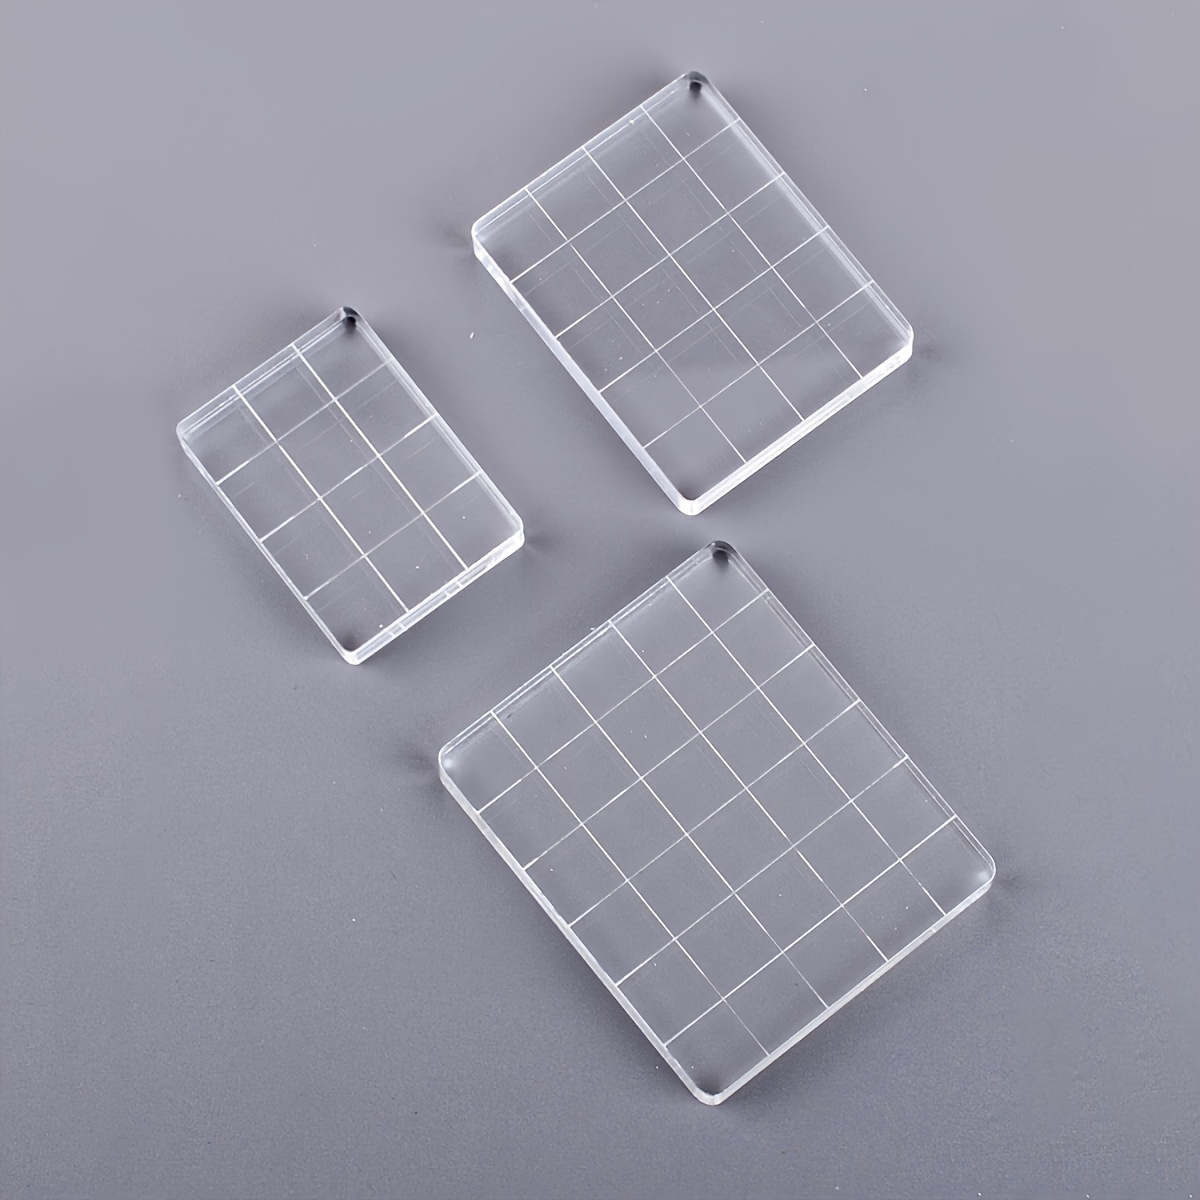 Acrylic Stamp Block Clear Stamping Tool Set with Grid Line Craft (9x12cm)